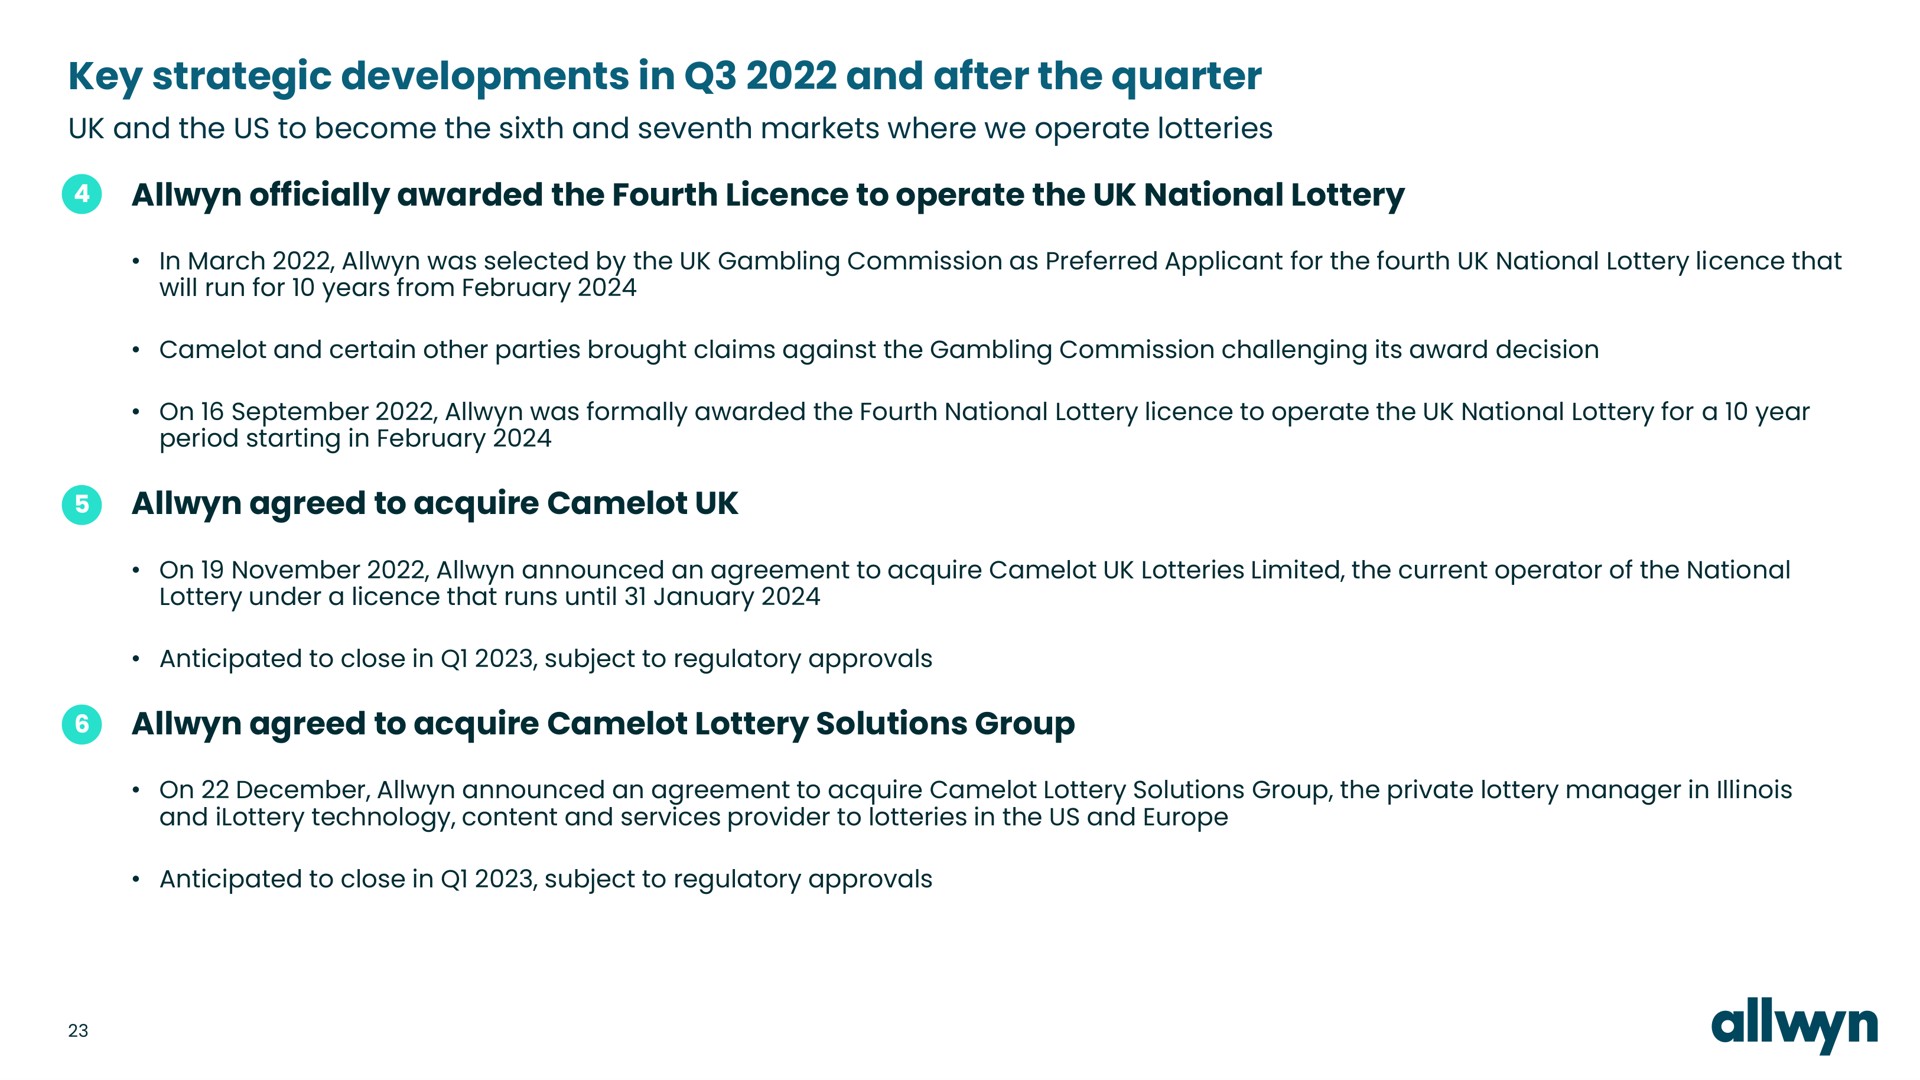 key strategic developments in and after the quarter officially awarded the fourth to operate the national lottery agreed to acquire agreed to acquire lottery solutions group | Allwyn